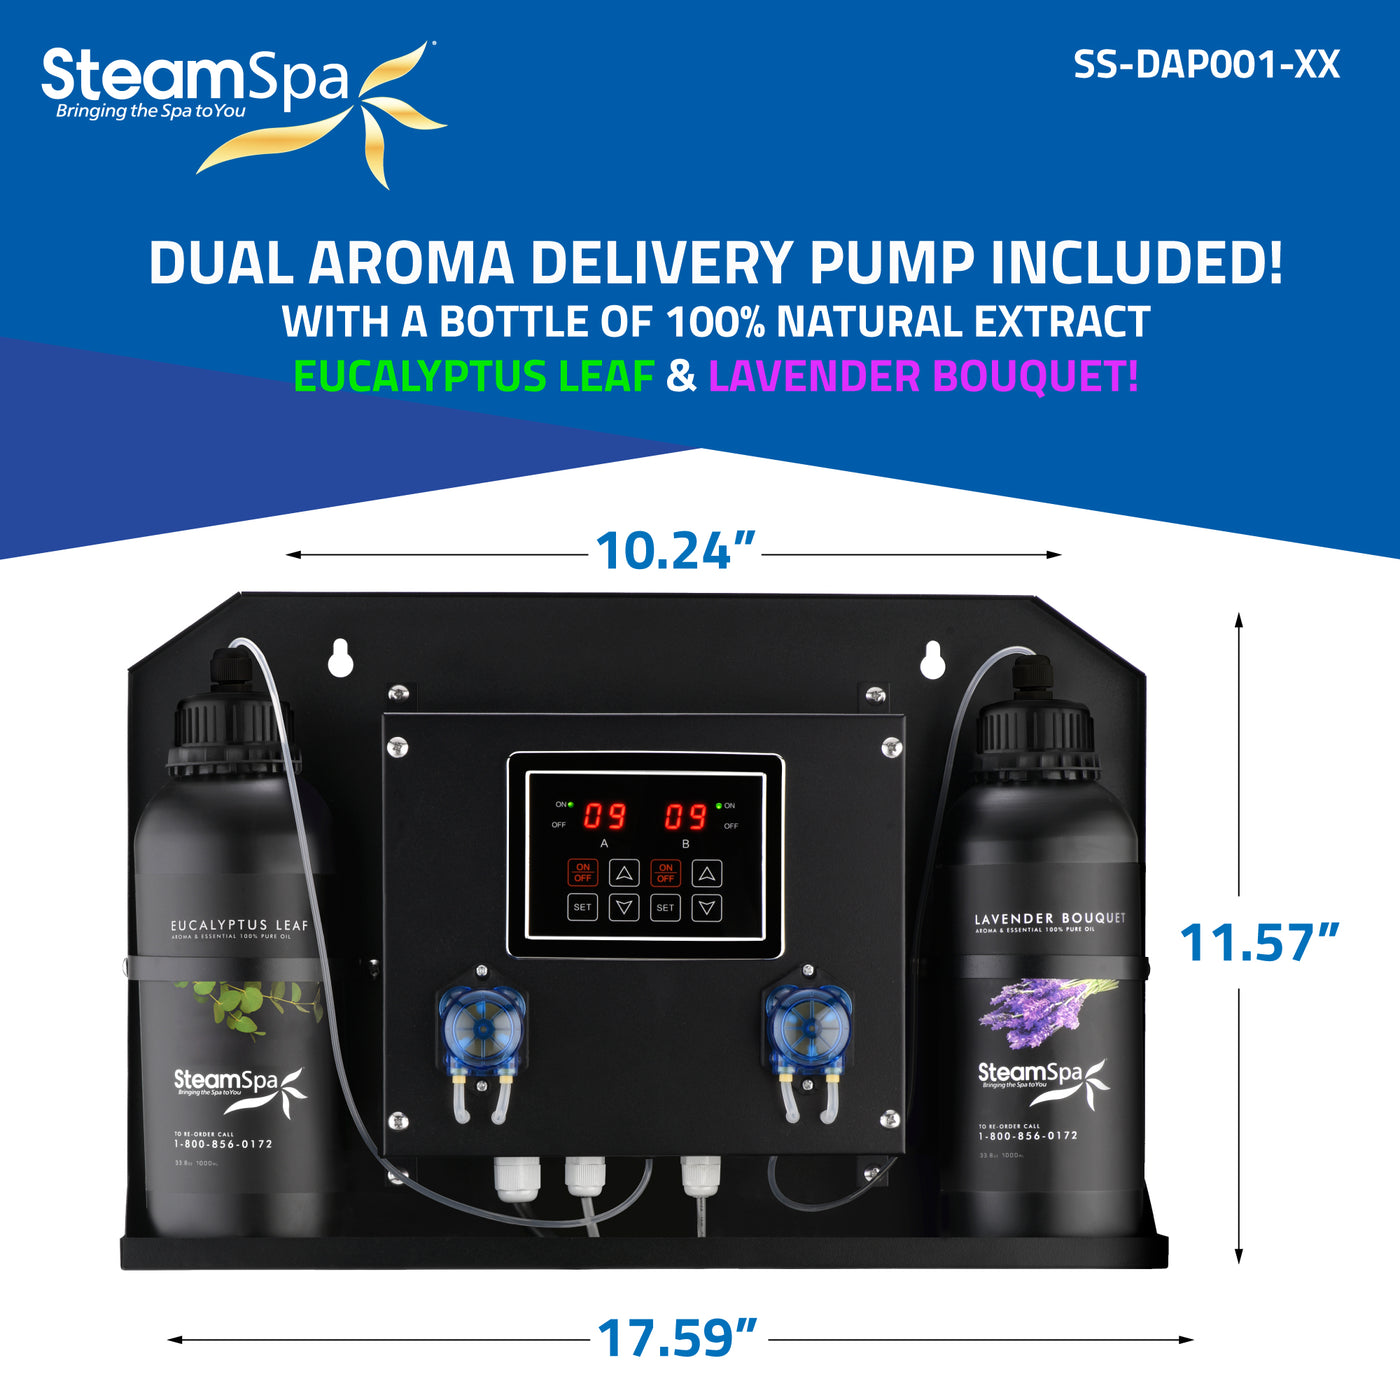 Black Series WiFi and Bluetooth 2 x 10.5kW QuickStart Steam Bath Generator Package with Dual Aroma Pump in Gold BKT2100GD-ADP